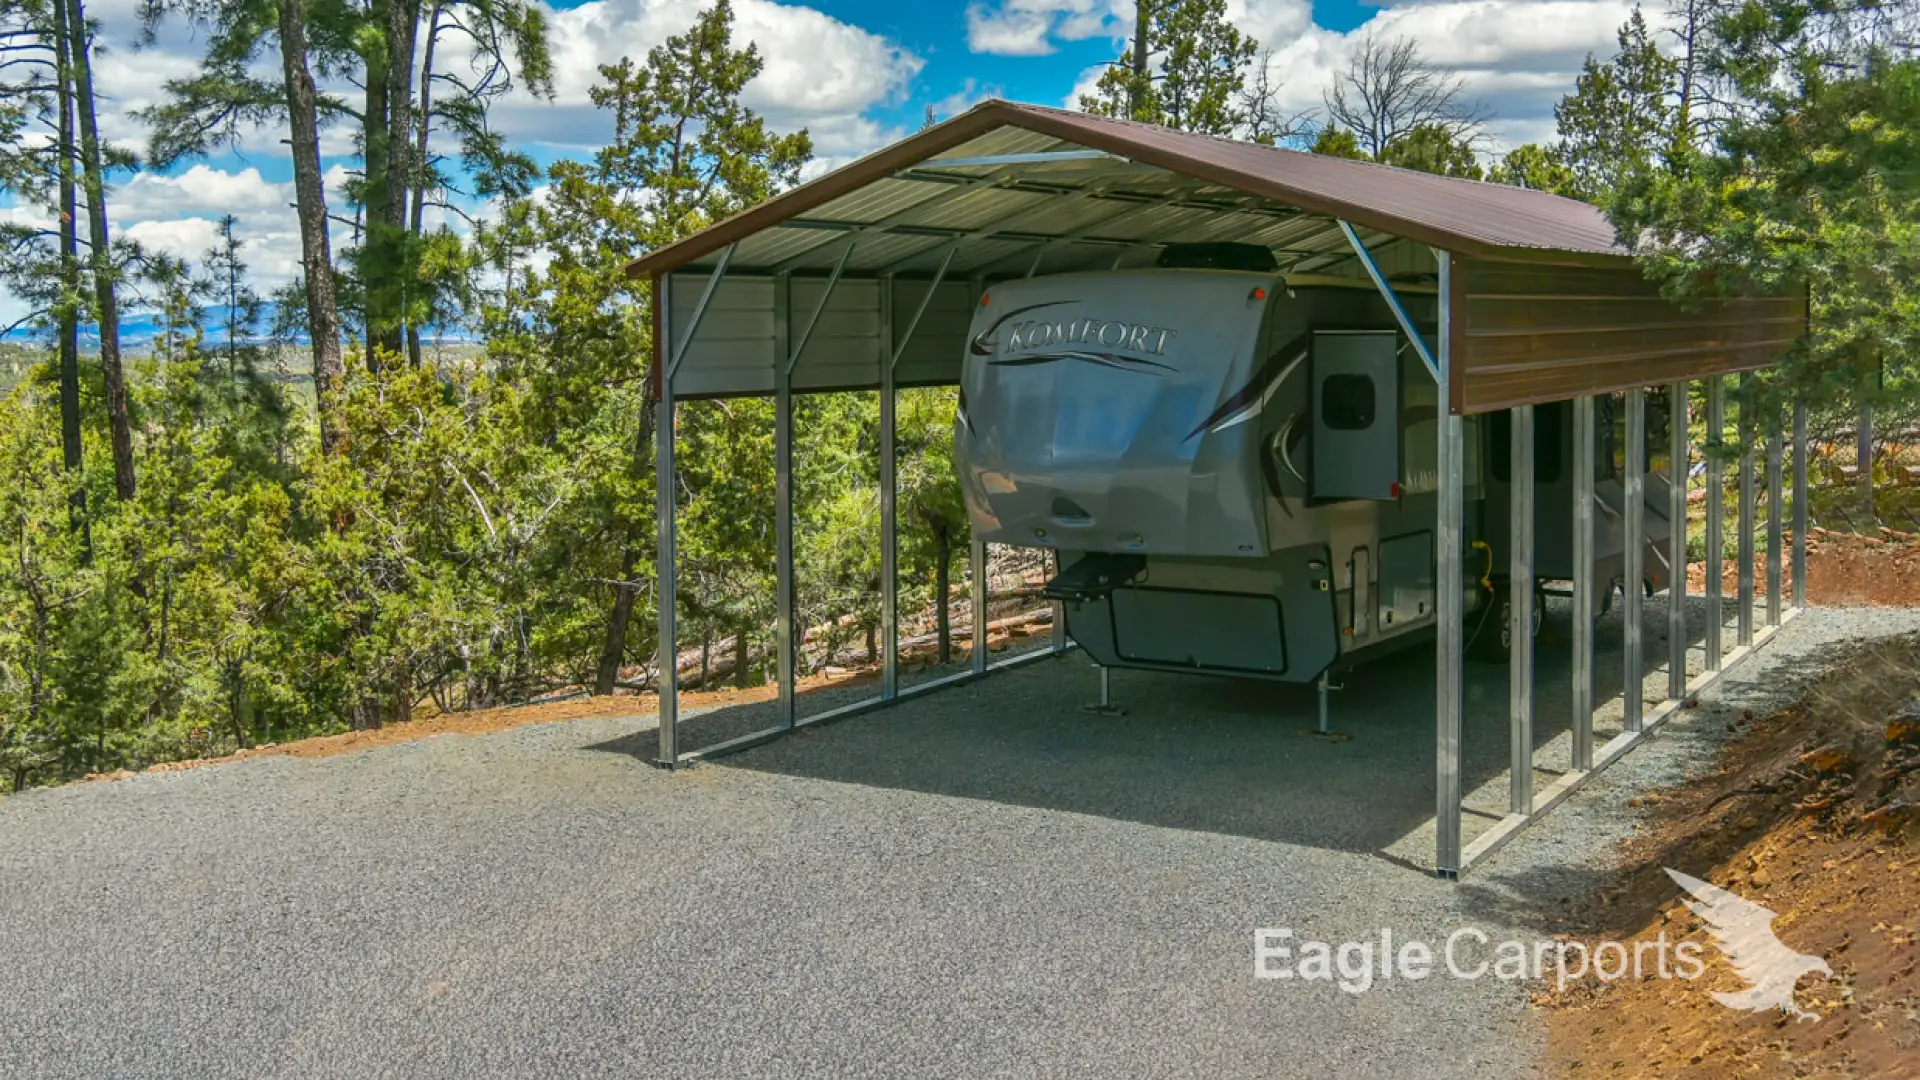 Metal RV Covers for Sale  Steel RV Carports at Affordable Prices